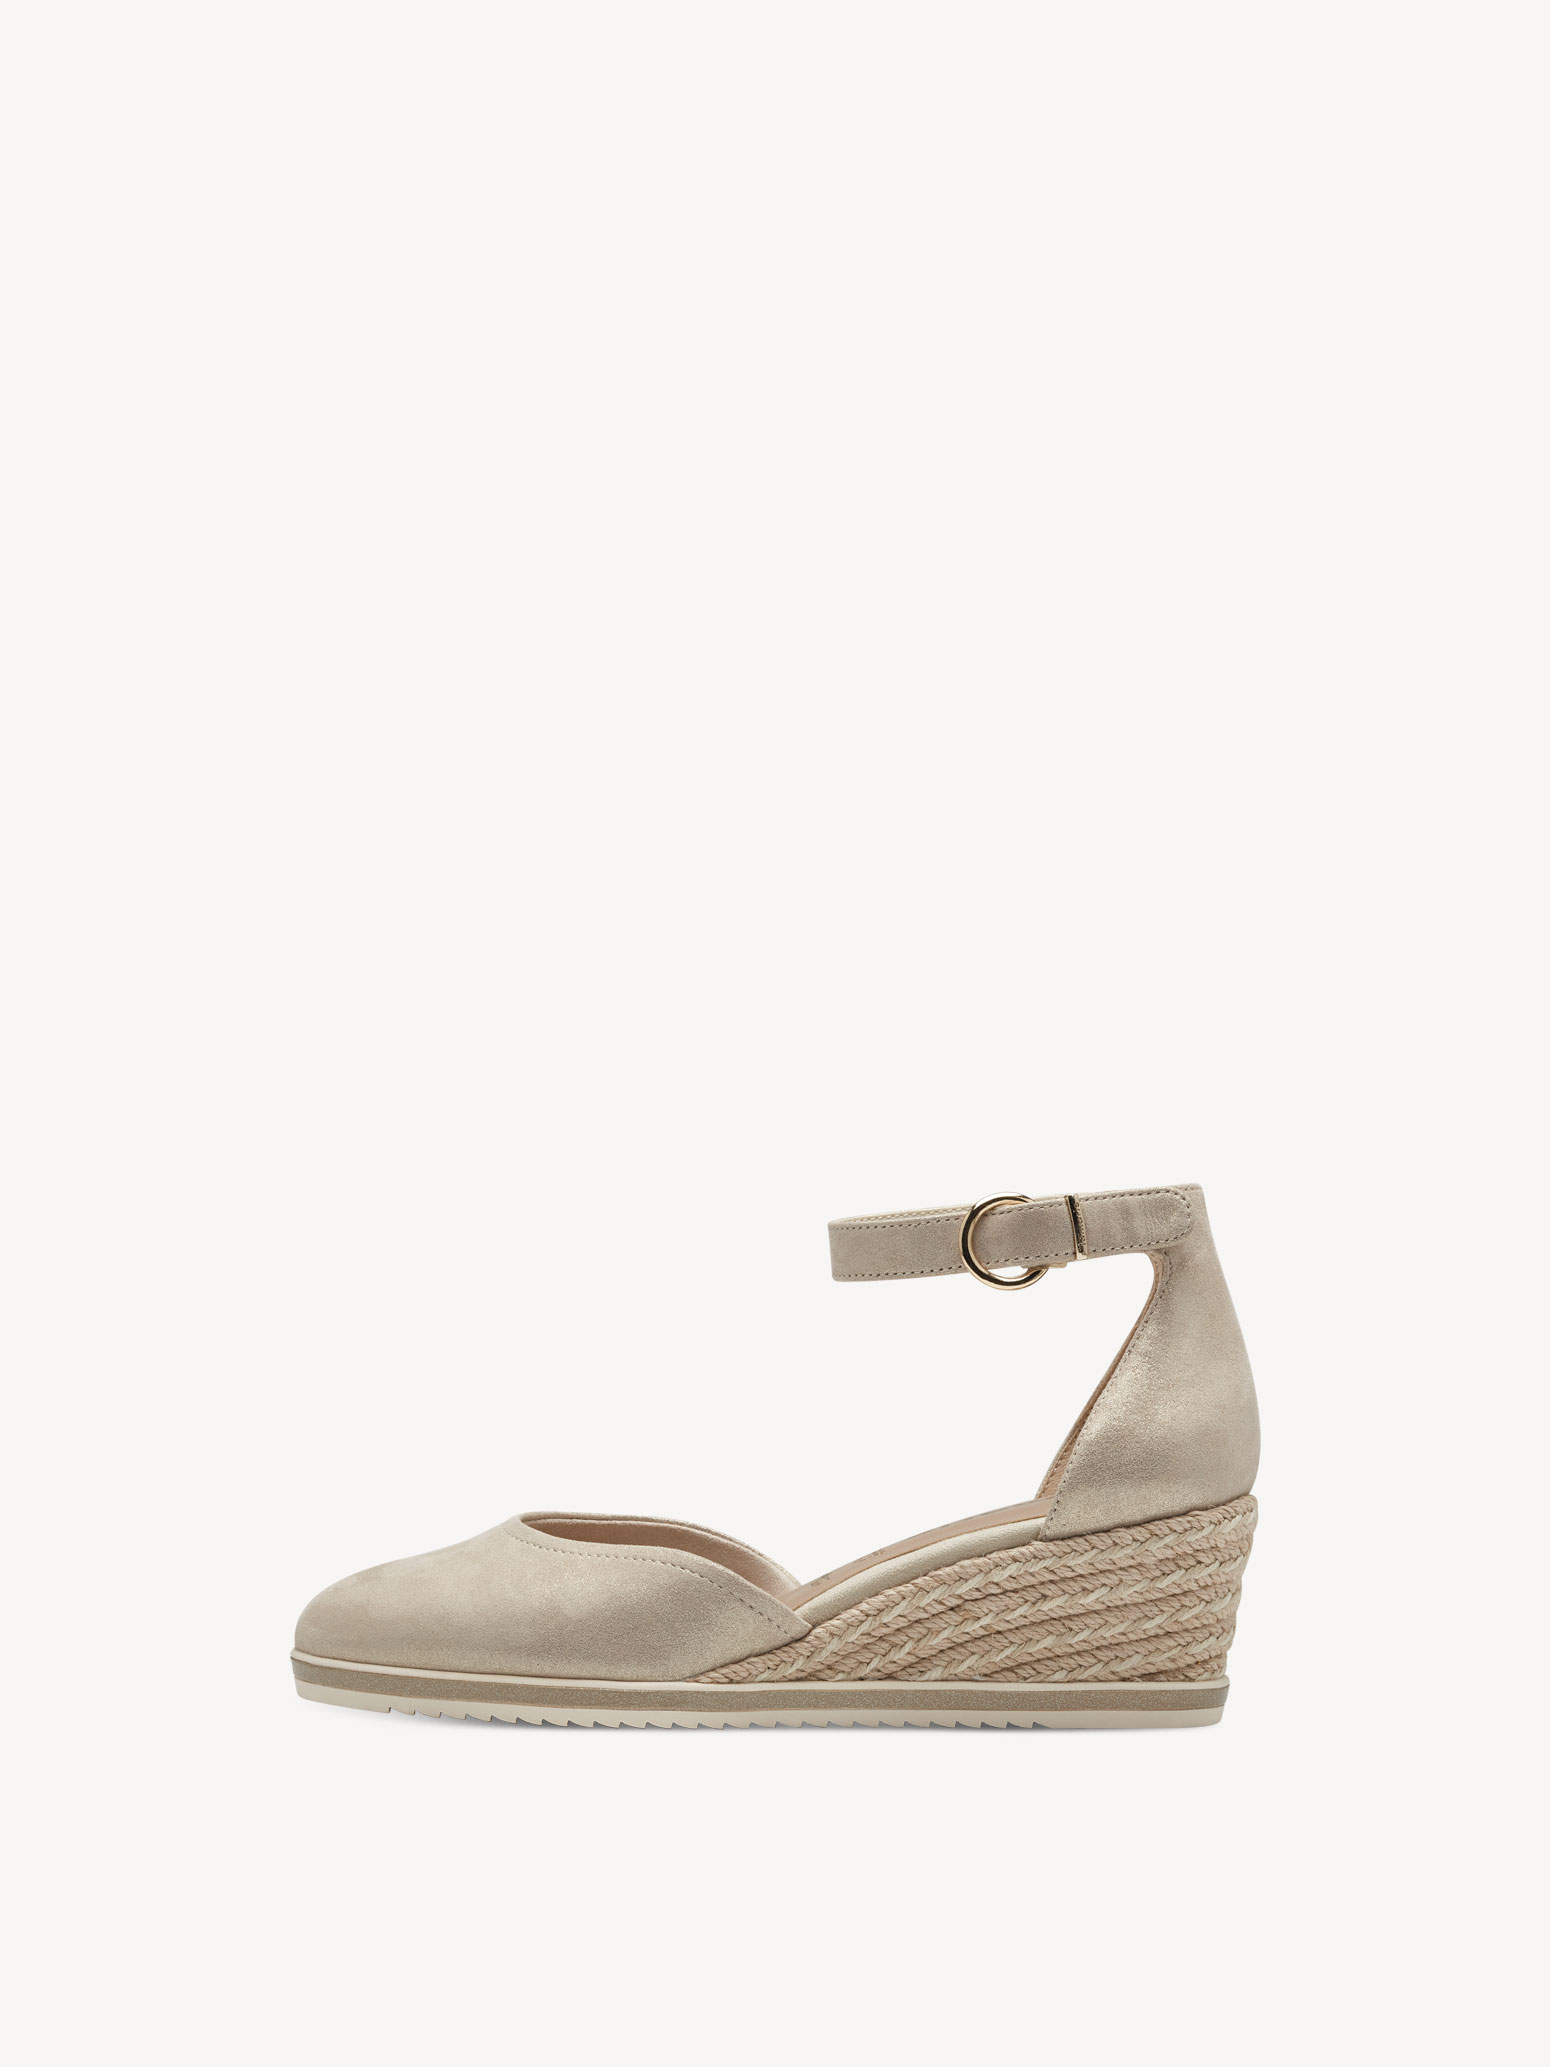 Leather Wedge pumps - beige